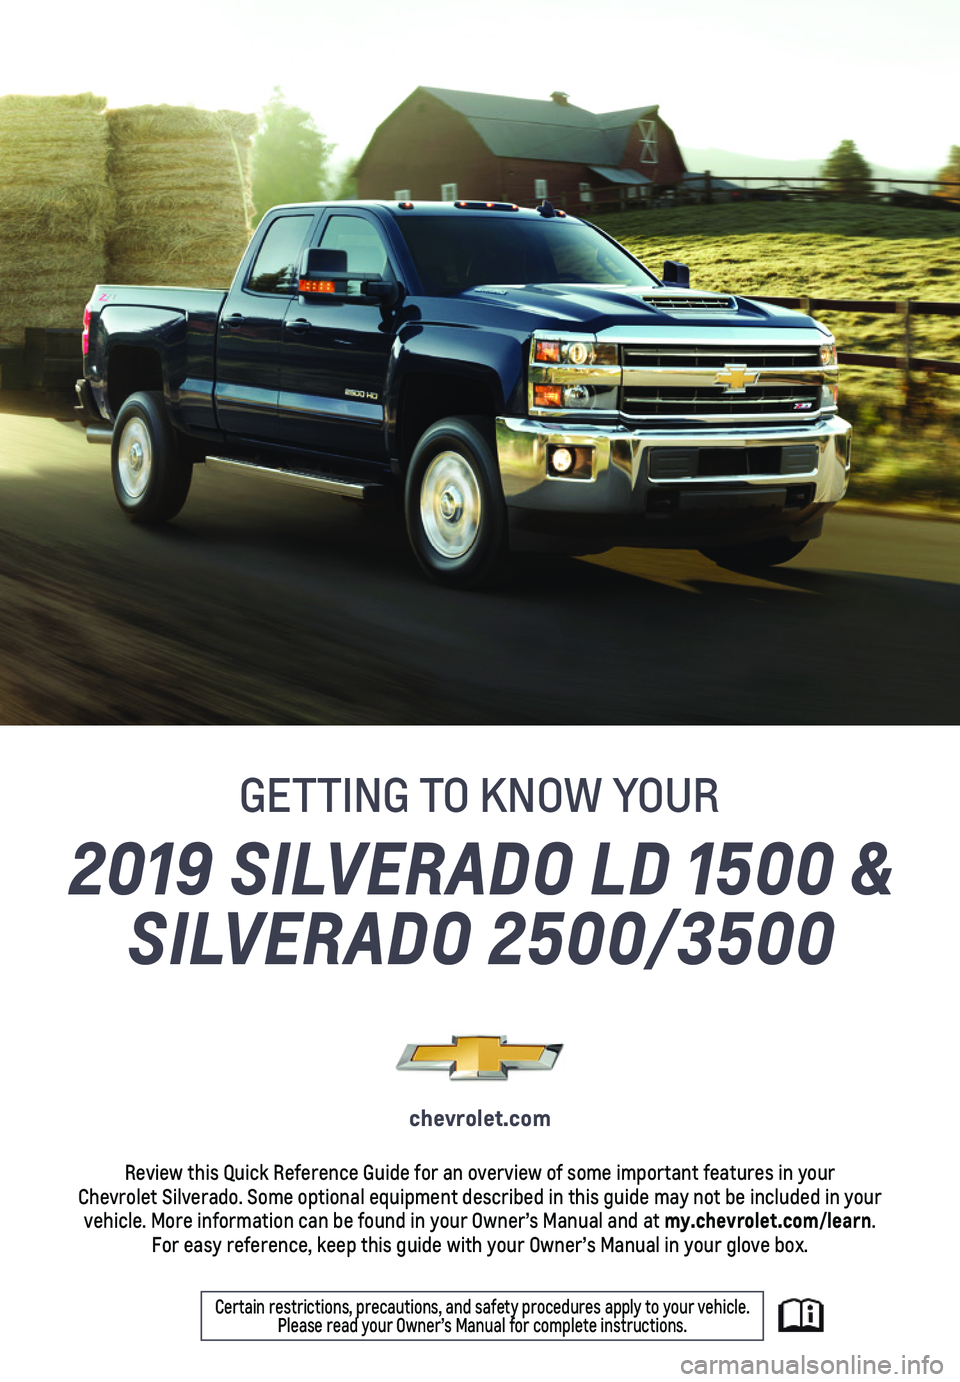 CHEVROLET SILVERADO 1500 LD 2019  Get To Know Guide 1
2019 SILVERADO LD 1500 & 
SILVERADO 2500/3500
GETTING TO KNOW YOUR
chevrolet.com
Review this Quick Reference Guide for an overview of some important feat\
ures in your  Chevrolet Silverado. Some opt